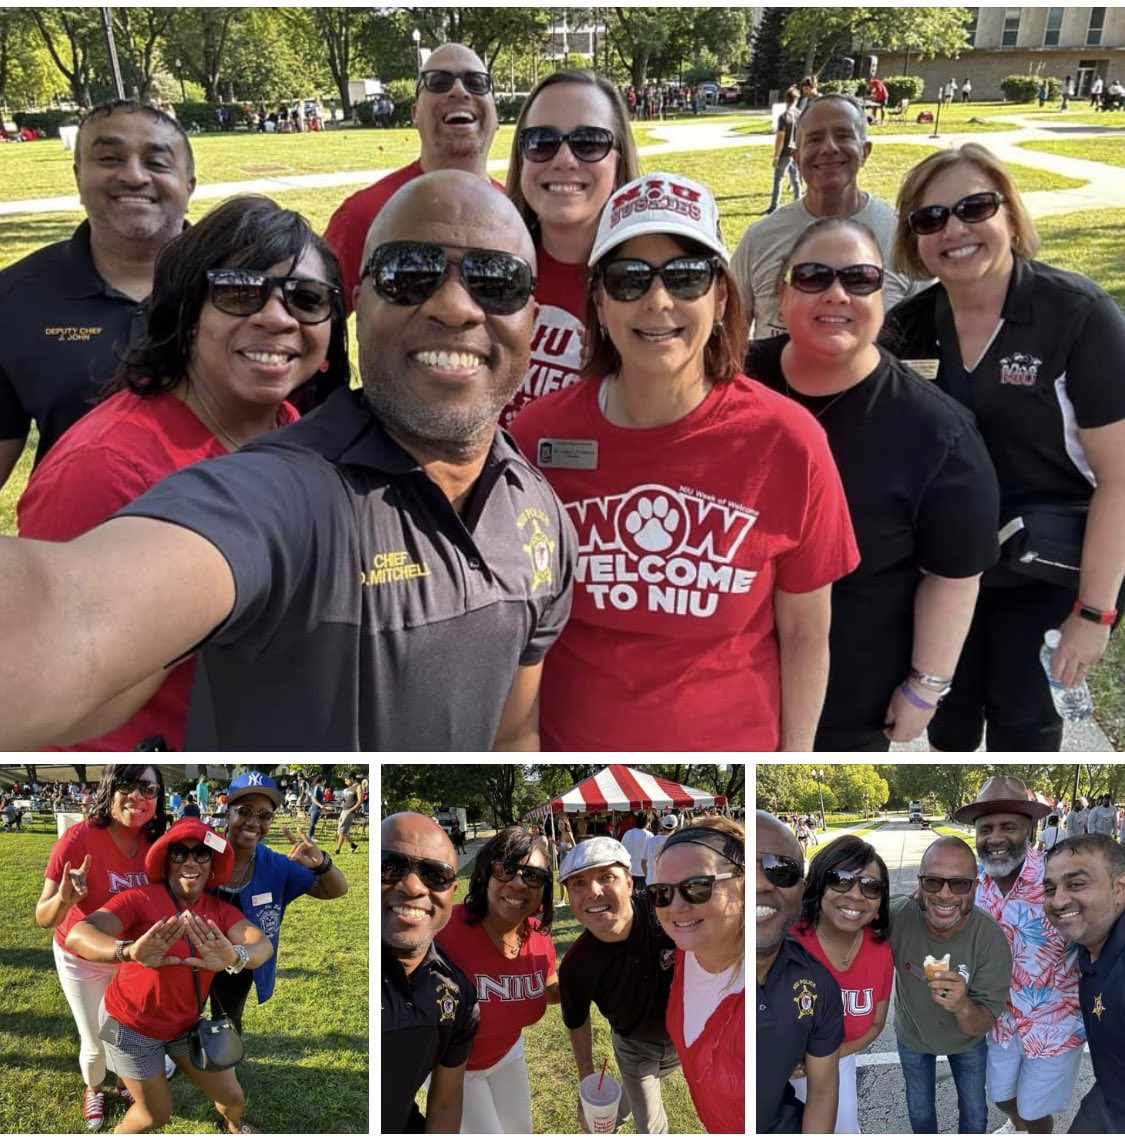 Great vibes today at the President’s Picnic welcoming all students back to campus. Wishing everyone a great school year! #niulaw #niulawhasitall #niulawis4you #niulawproud